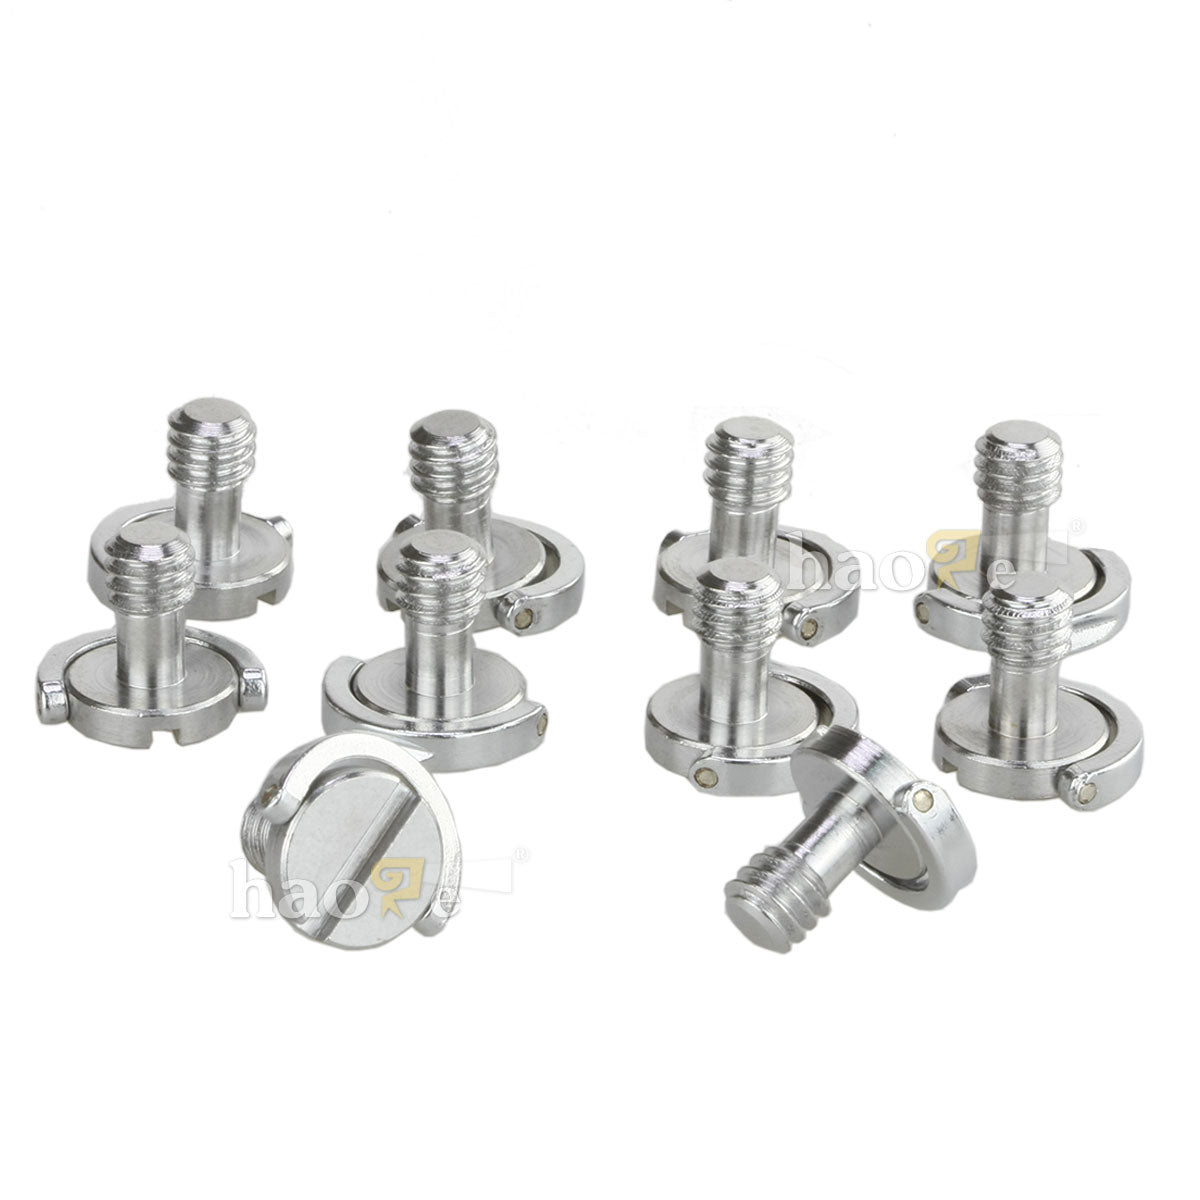 Haoge 1/4"-20 D-Ring Stainless Steel Mounting Fixing Screw for Camera Tripod Monopod Quick Release Plate (Pack of 10)